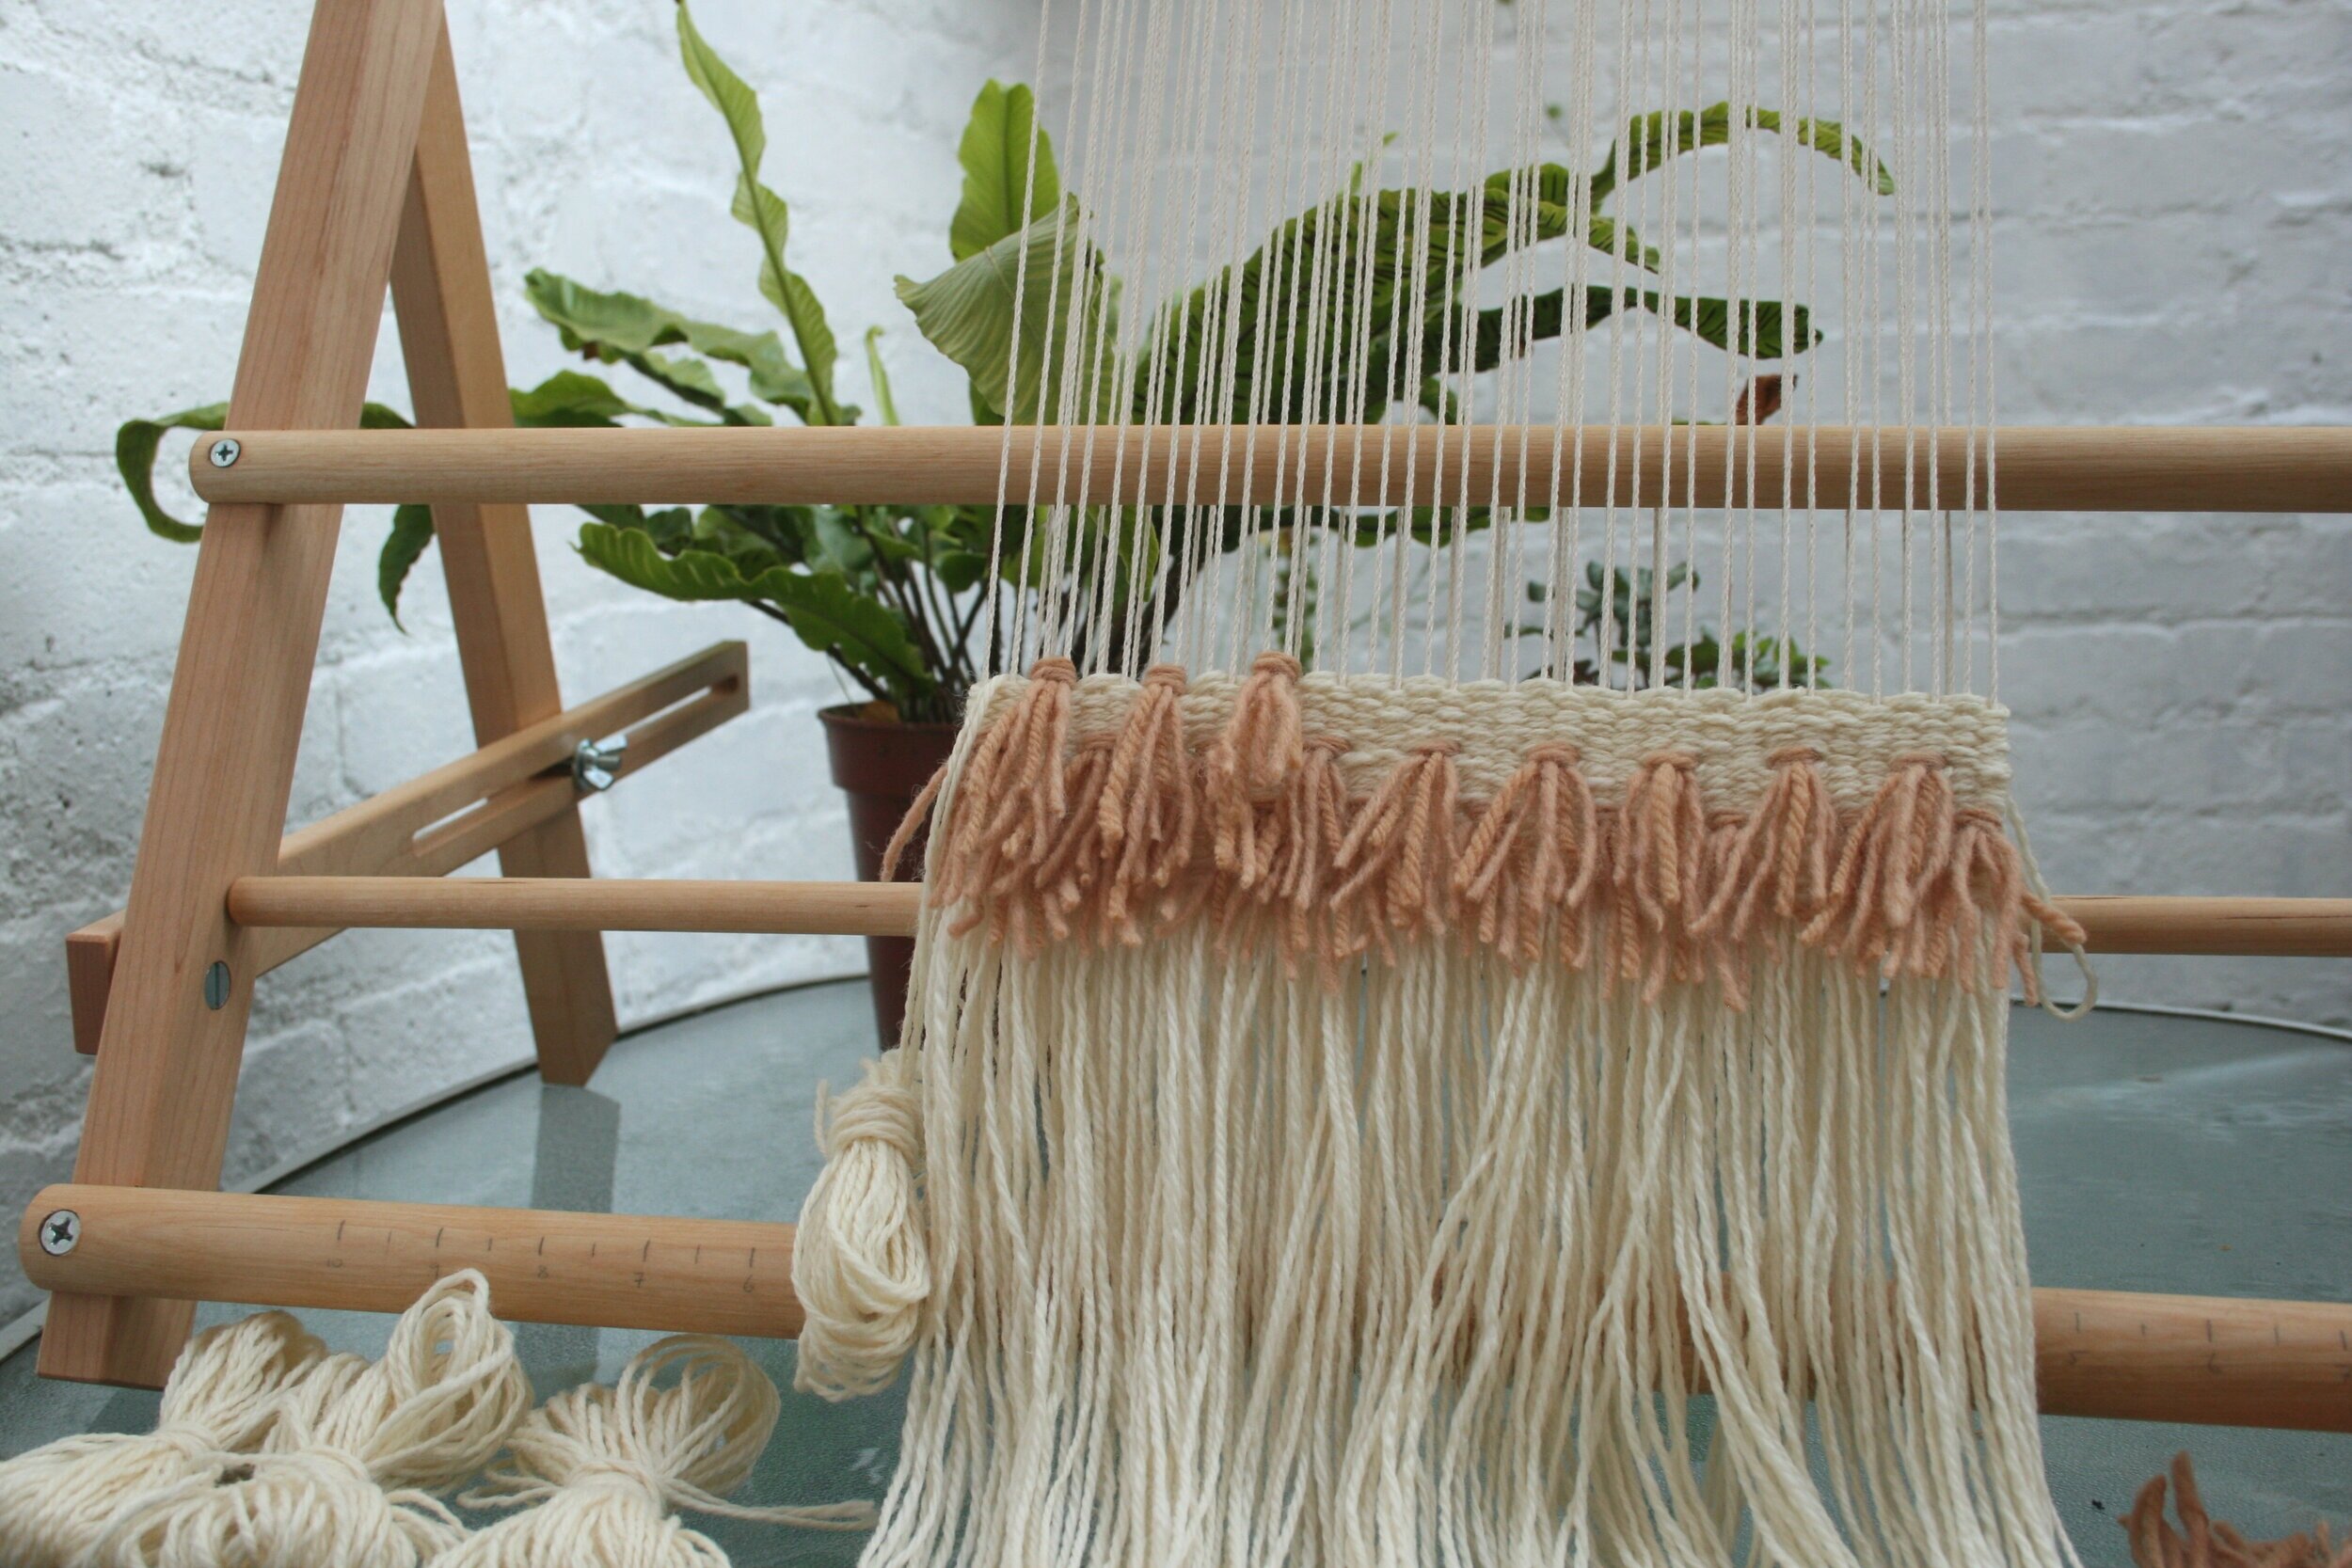 What Beginner Weaving Supplies do you Need to your first Woven